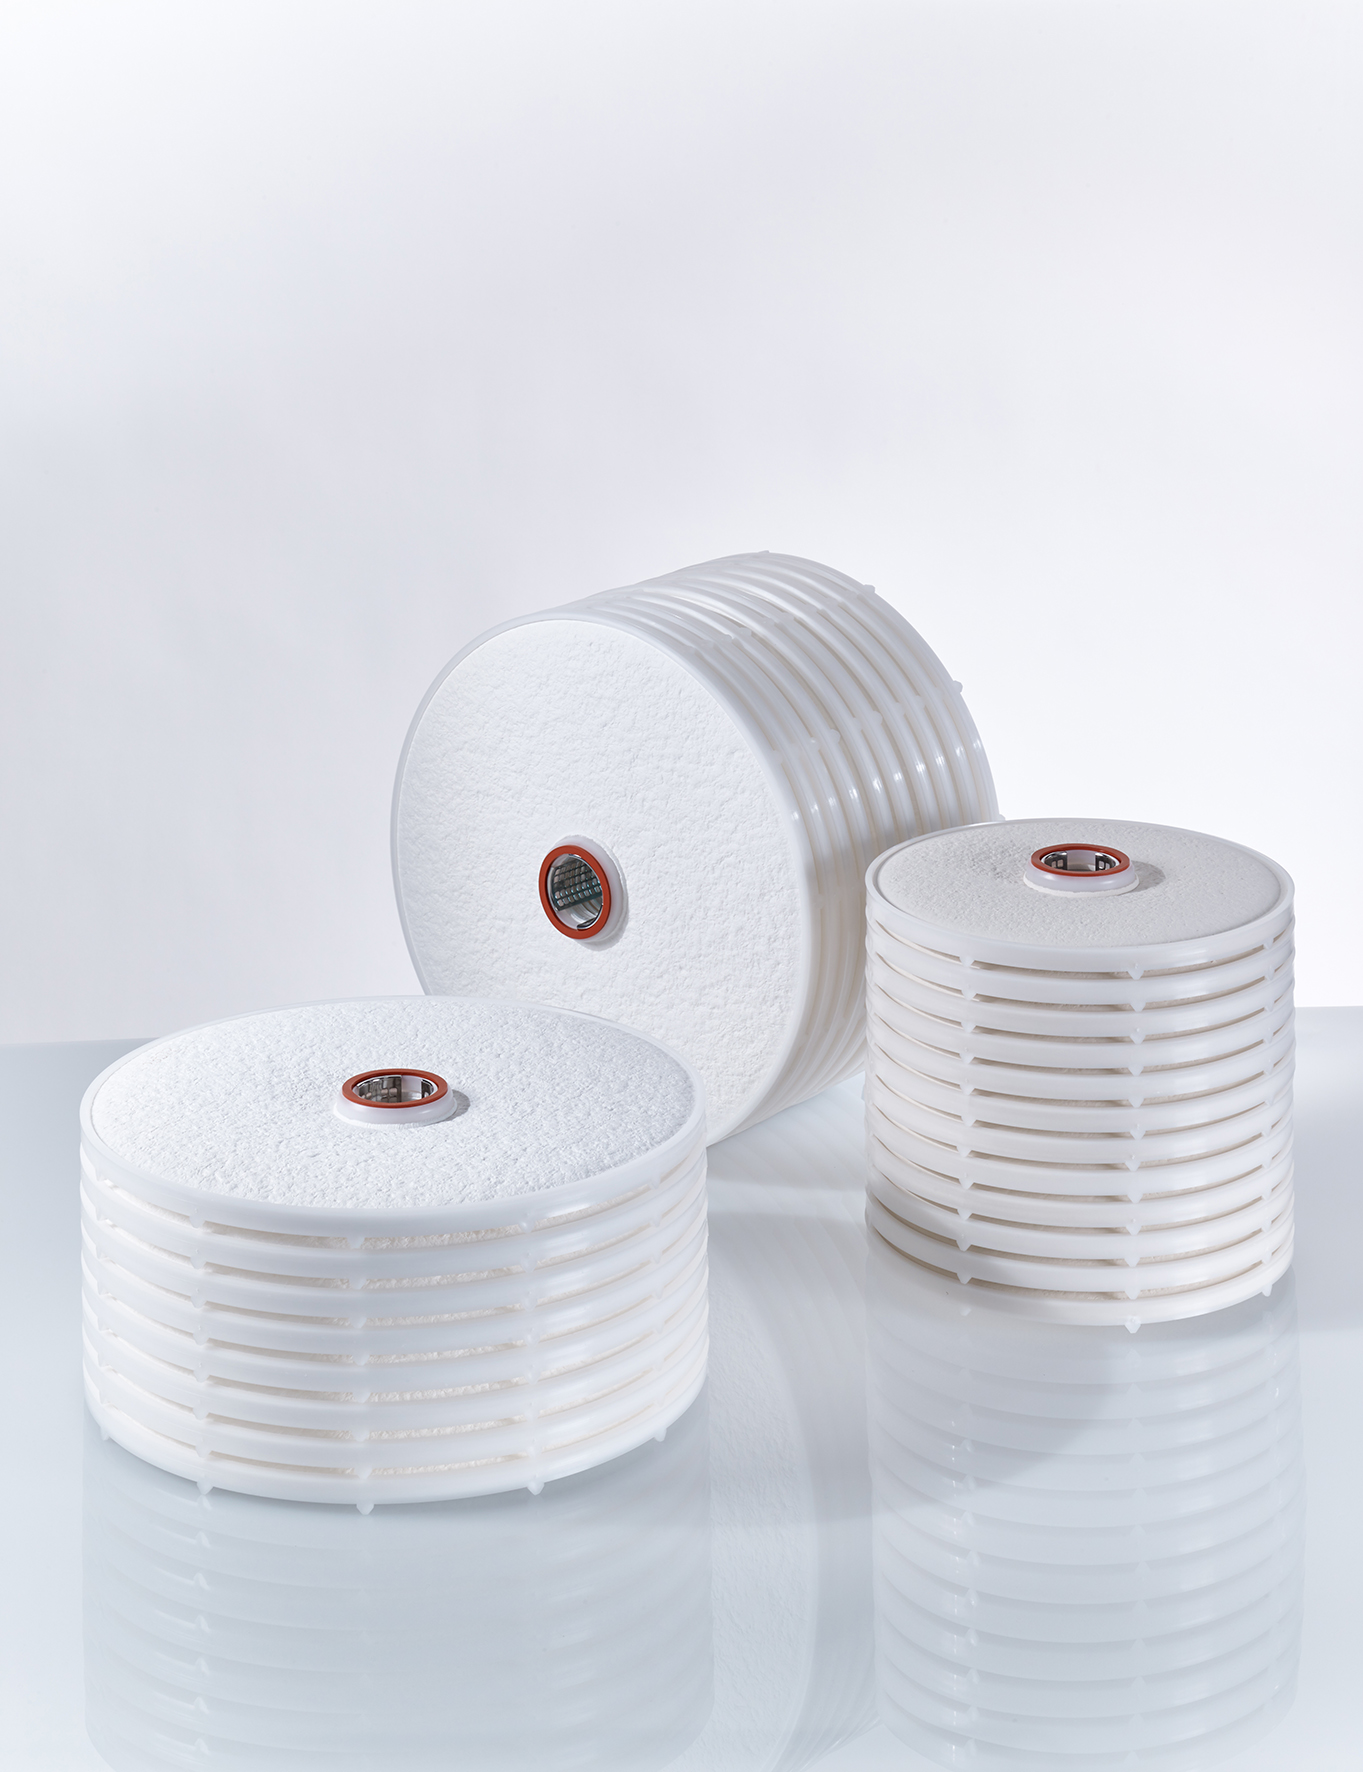 The new double-layer stacked disc cartridges from the BECODISC BX range provide two-step filtration in a single housing.